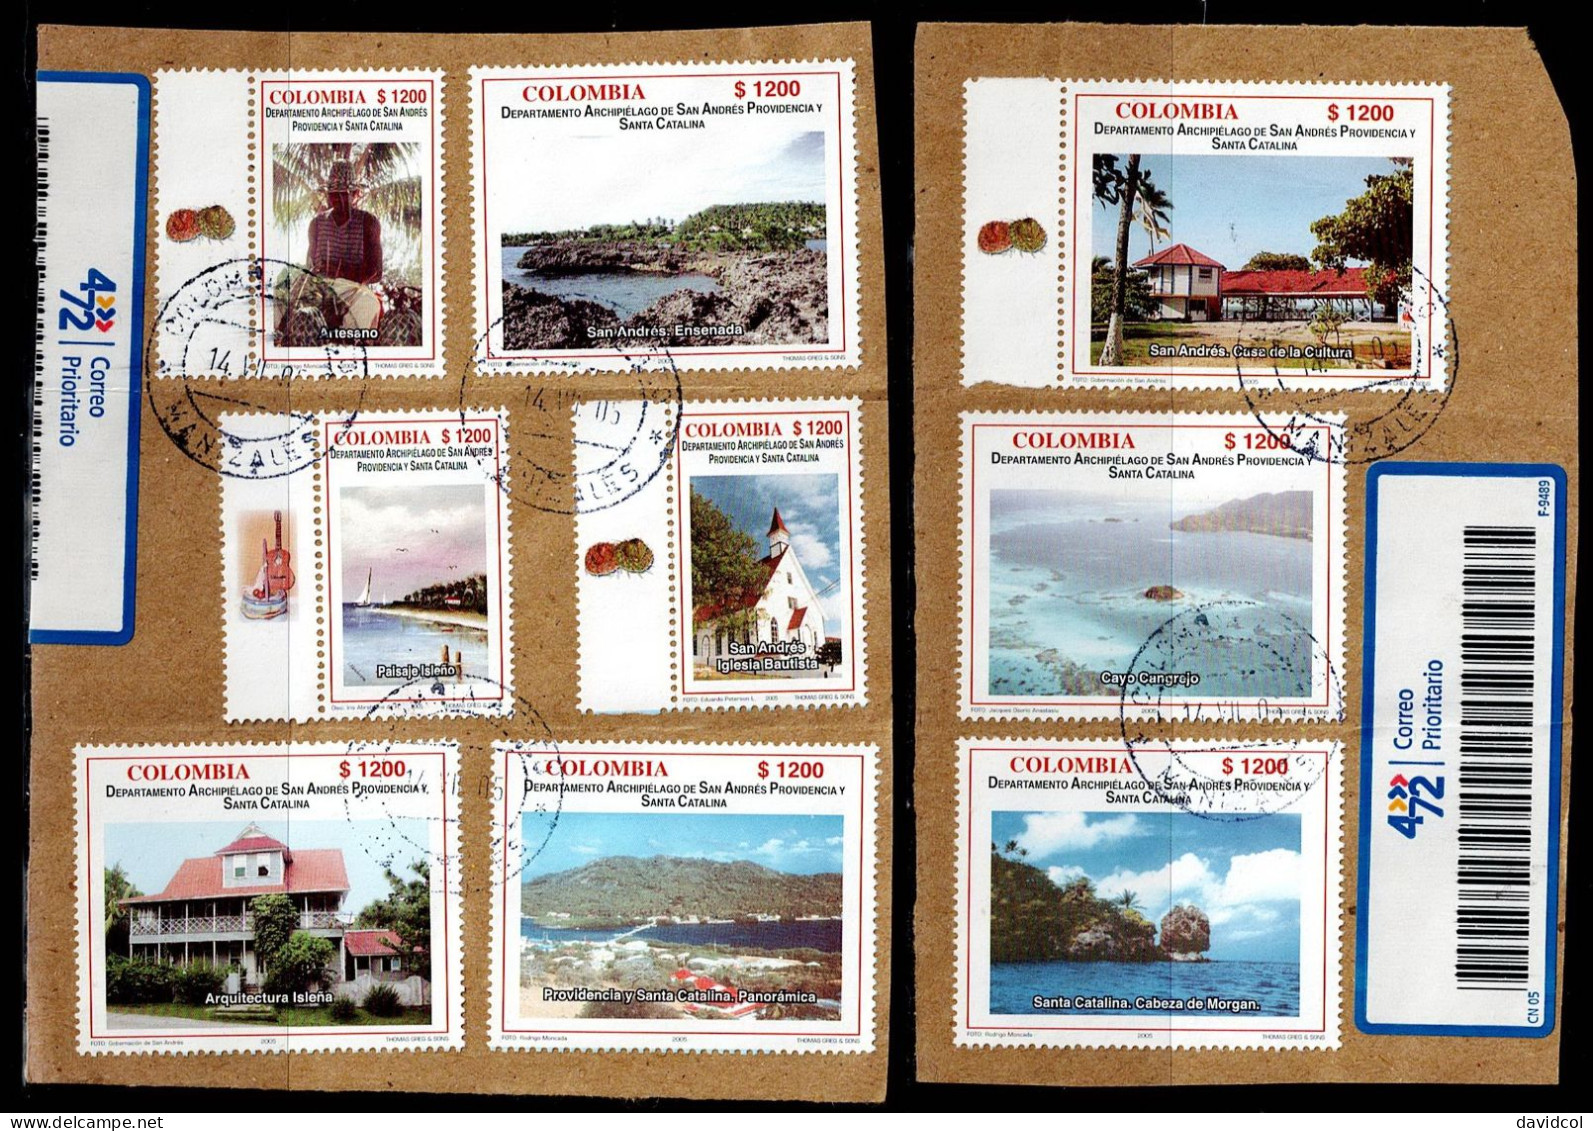 0005I-COLOMBIA-2005- USED STAMPS LOT - SAN ANDRES DEPARTMENT - COMPLETE SET - Colombia